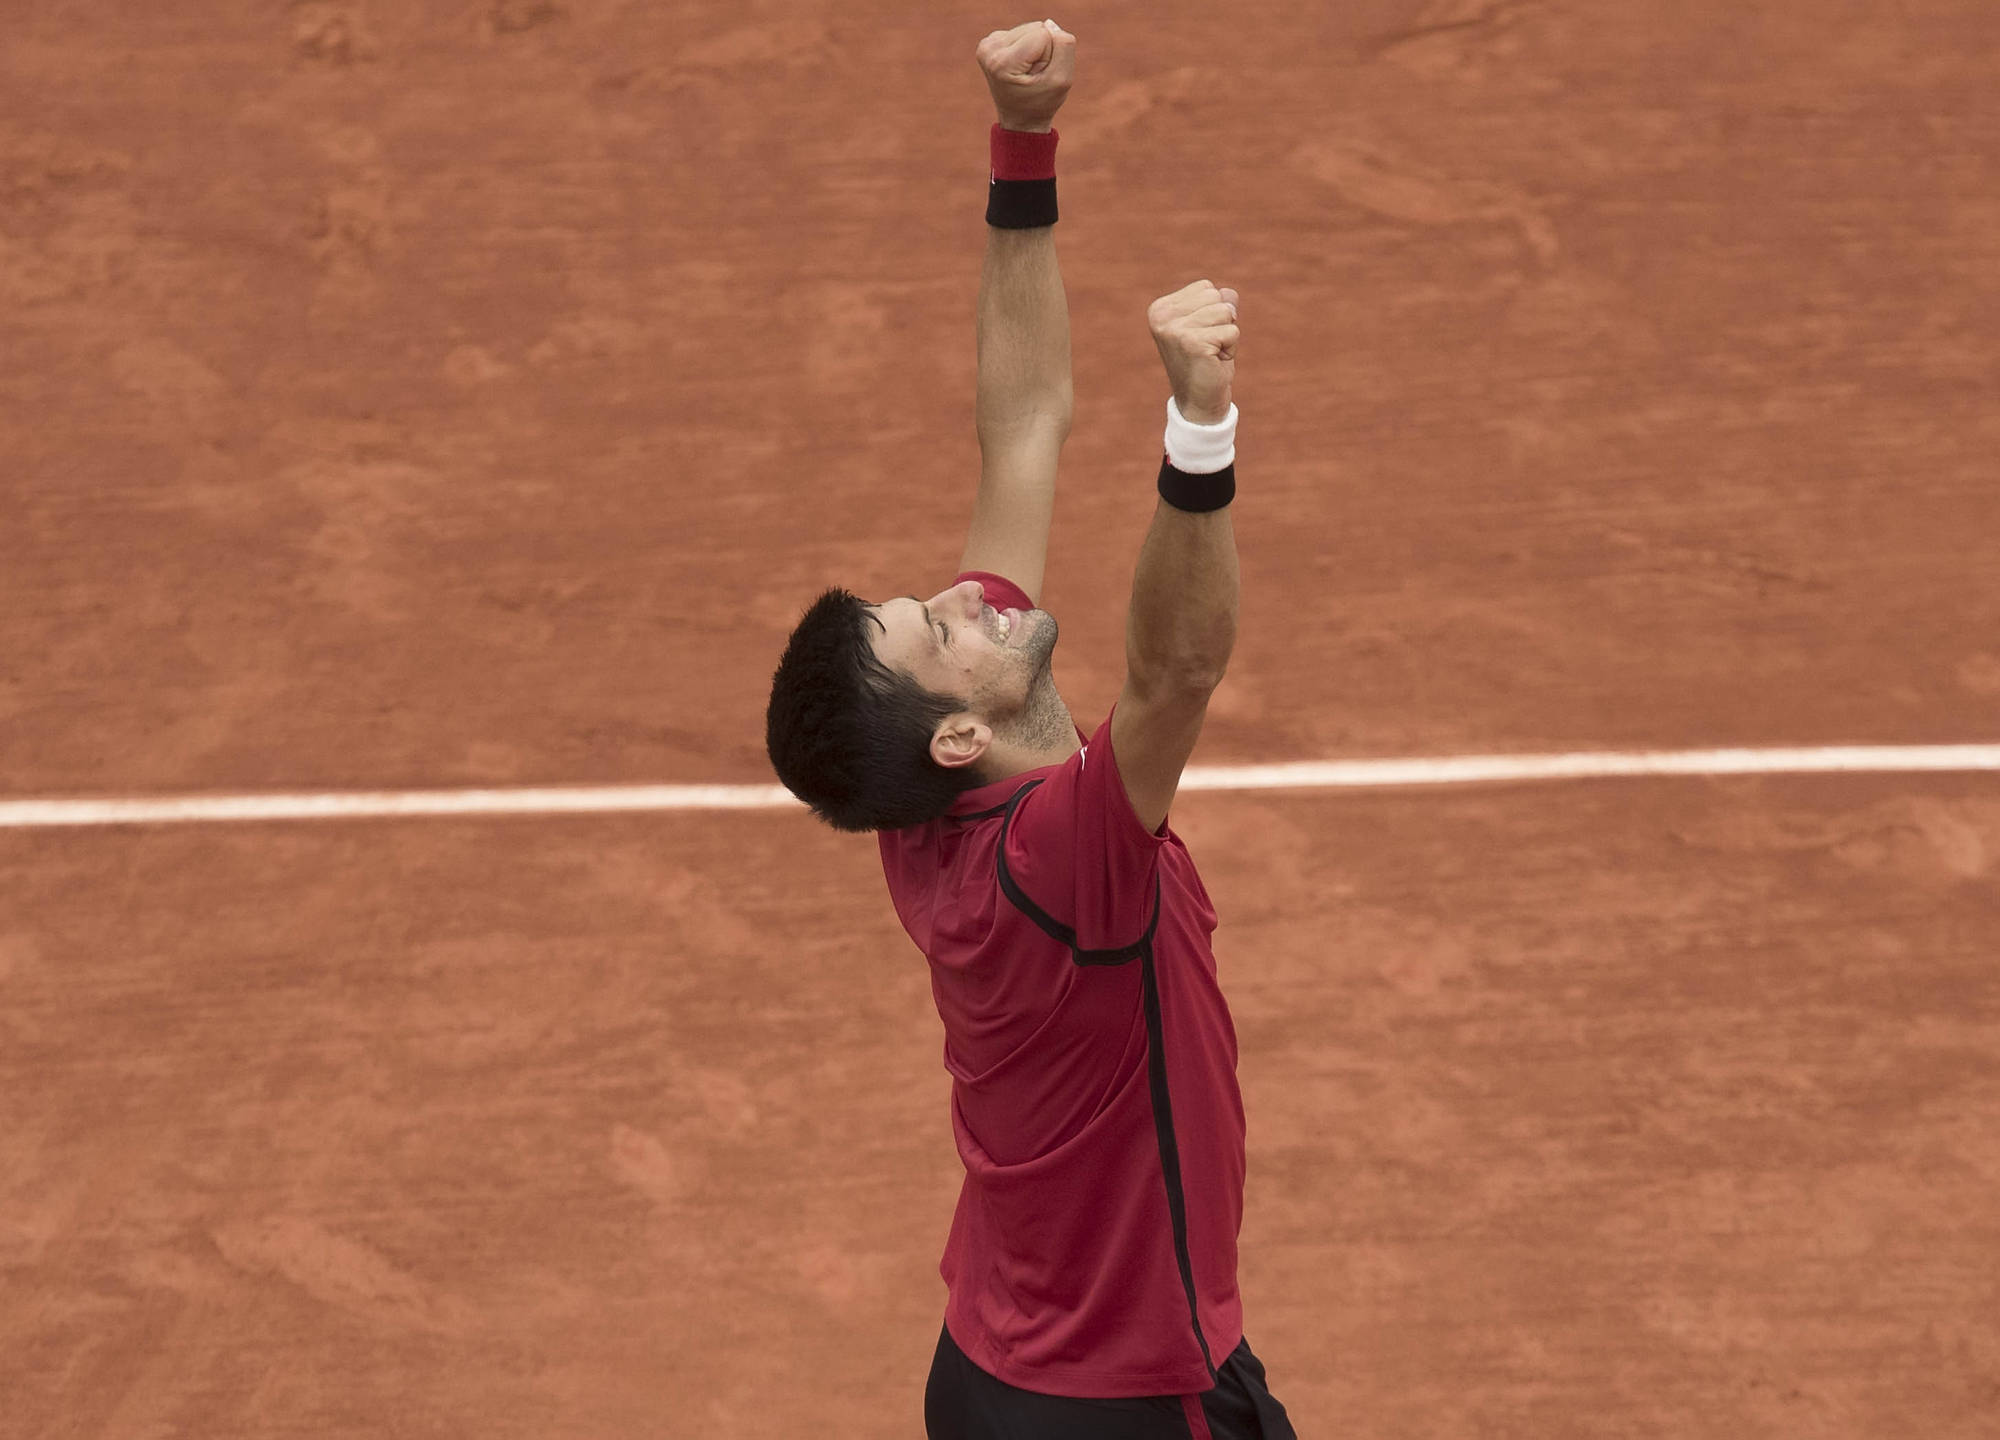 Novak Djokovic completes the career Grand Slam with victory over Andy Murray at the French Open